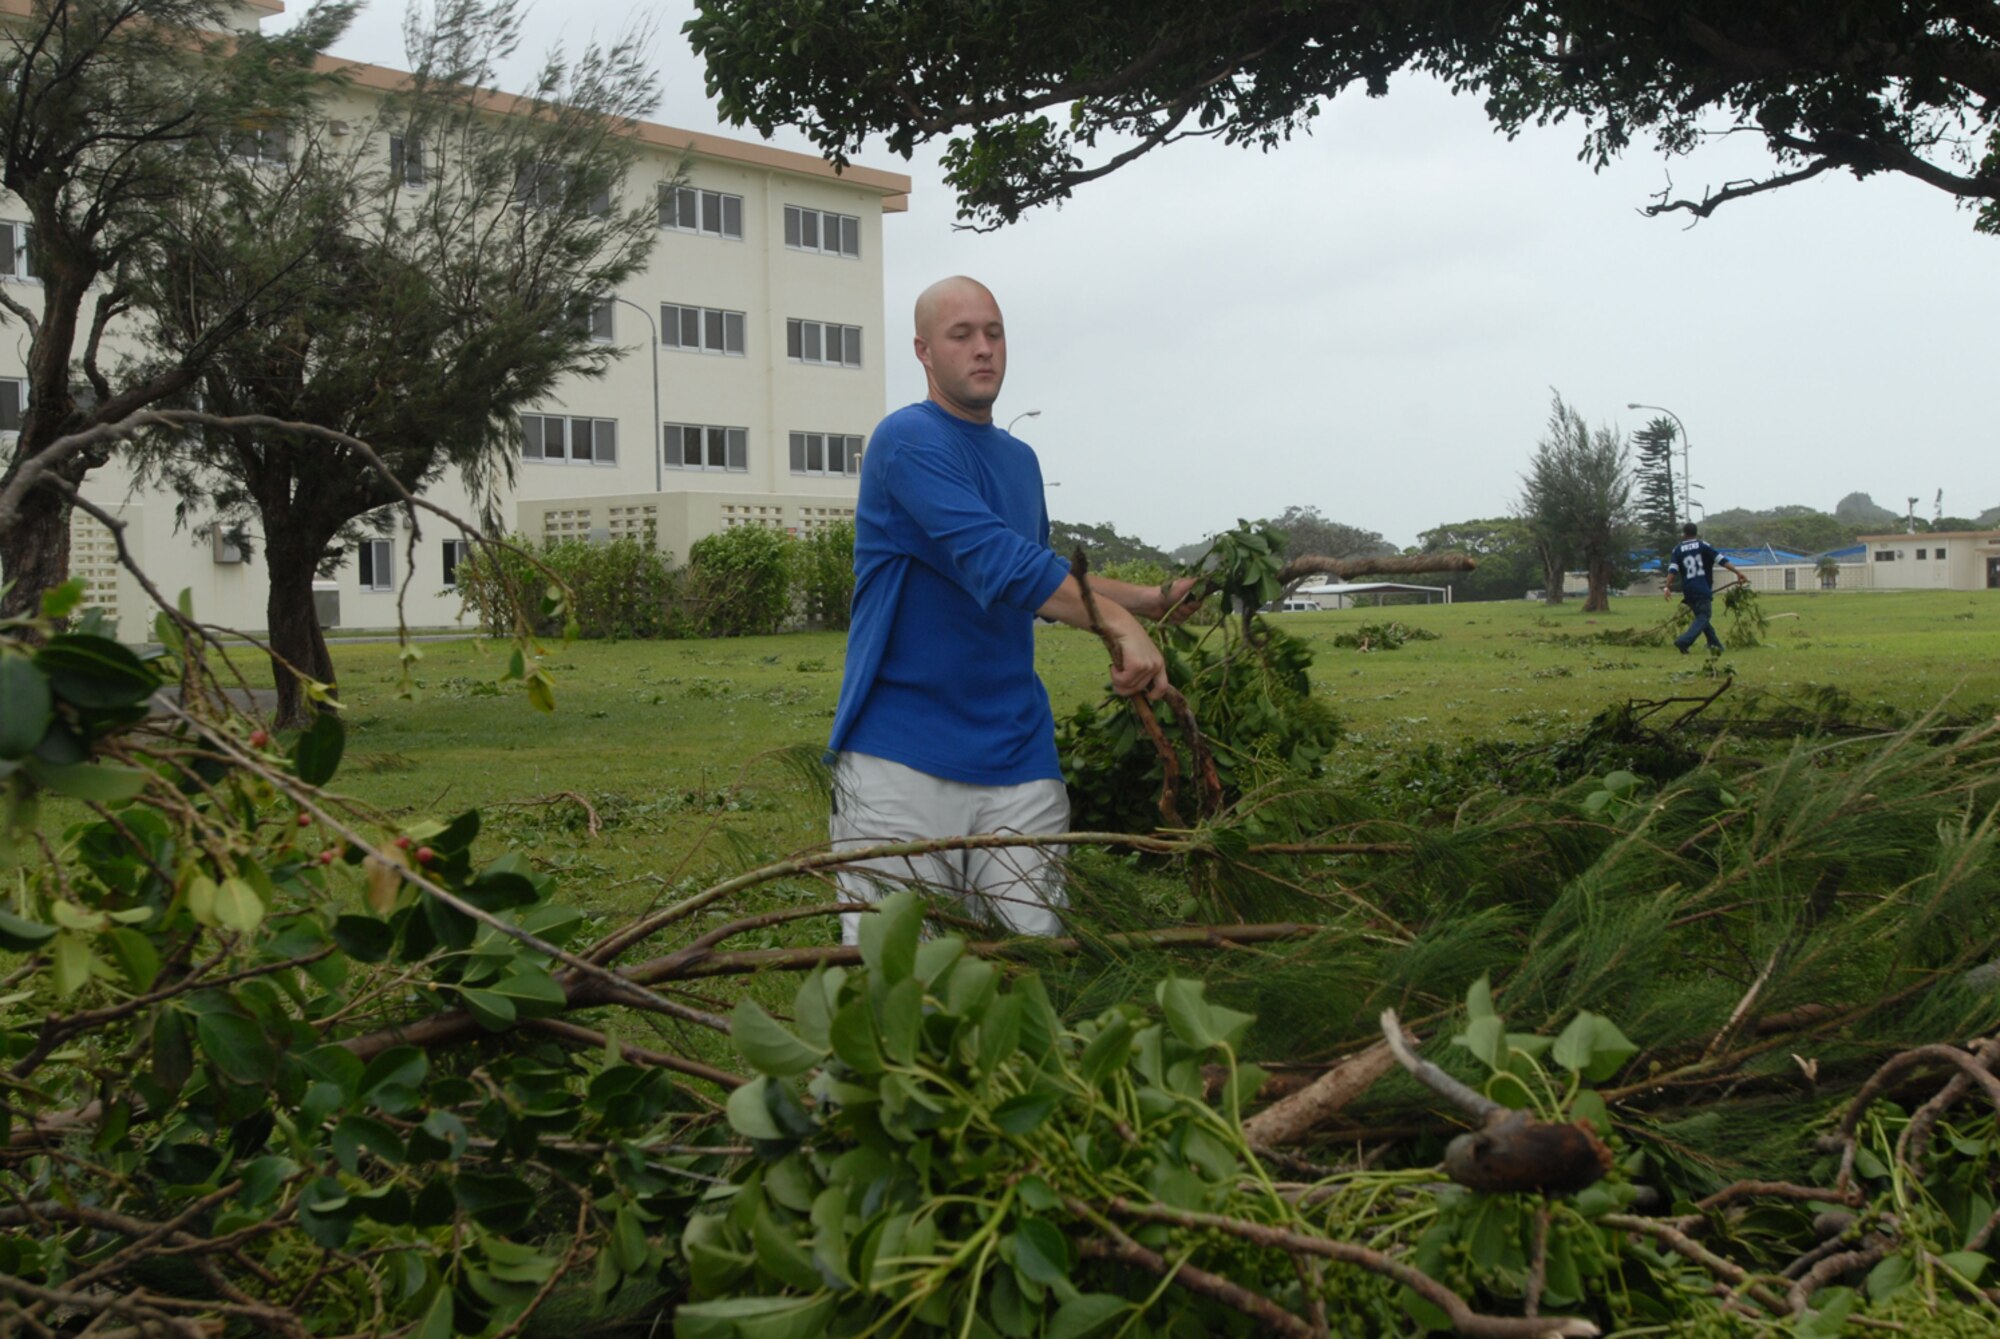 Senior Airman Matthew Amerson piles tree branches outside his dormitory at Kadena Air Base, Japan, July 14, 2007. The branches were knocked down by Typhoon Man-Yi which brought the base 77 mph winds gusting to 105 mph.  There were no injuries or significant damages to base structures.  The typhoon was the strongest to hit the base since 2003.  Airman Amerson is assigned to the 18th Logistics Readiness Squadron.  U.S. Air Force Photo/Senior Airman Darnell T. Cannady